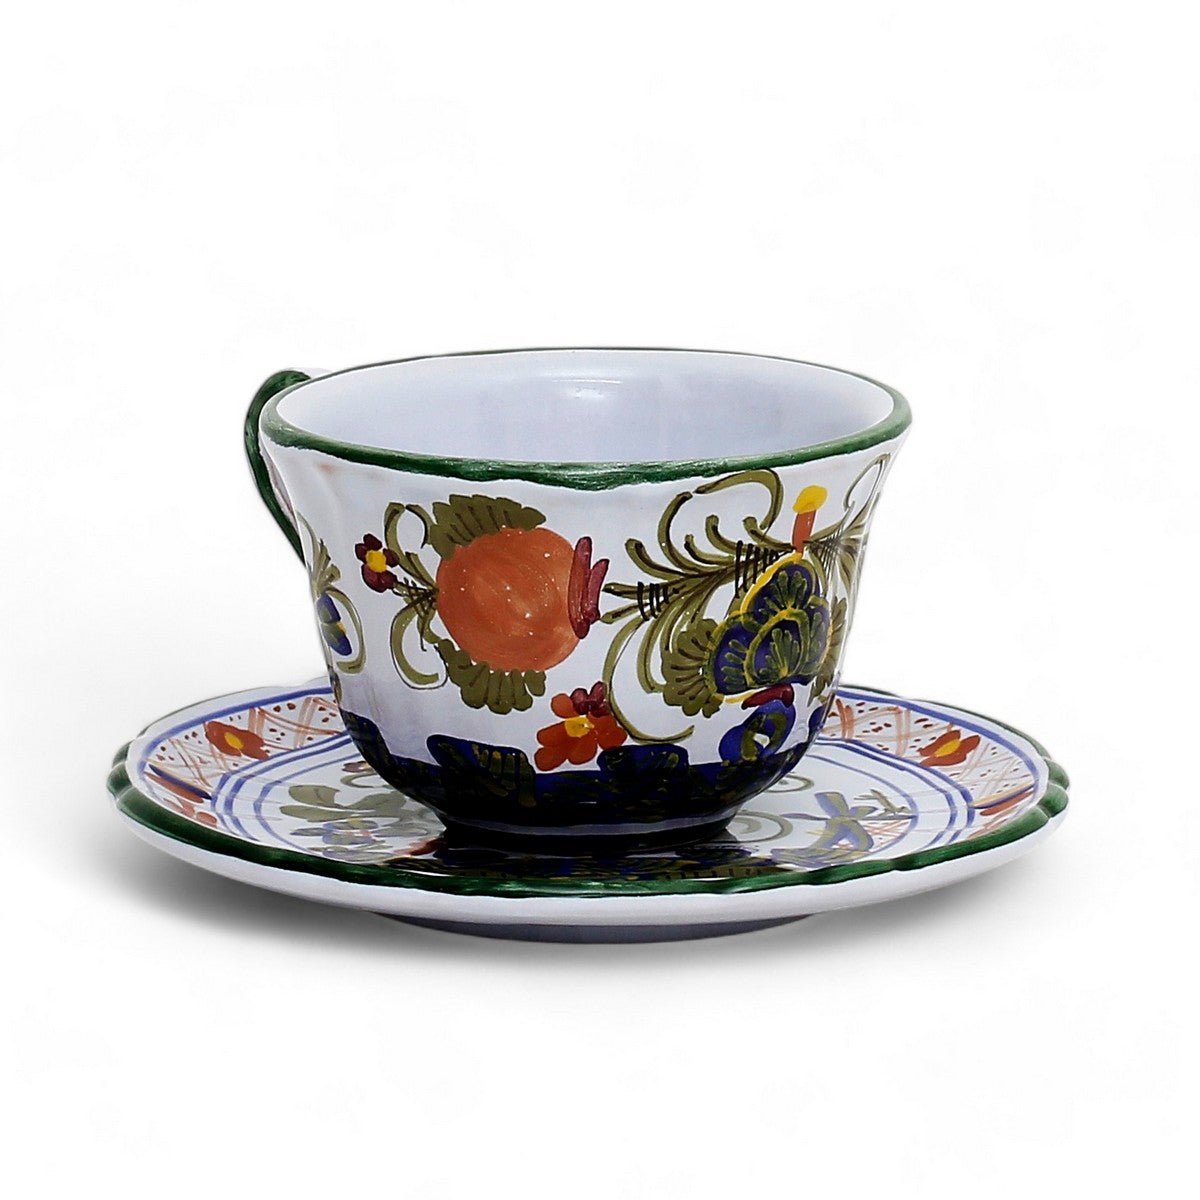 FAENZA-CARNATION: Coffee Tea Cup and Saucer